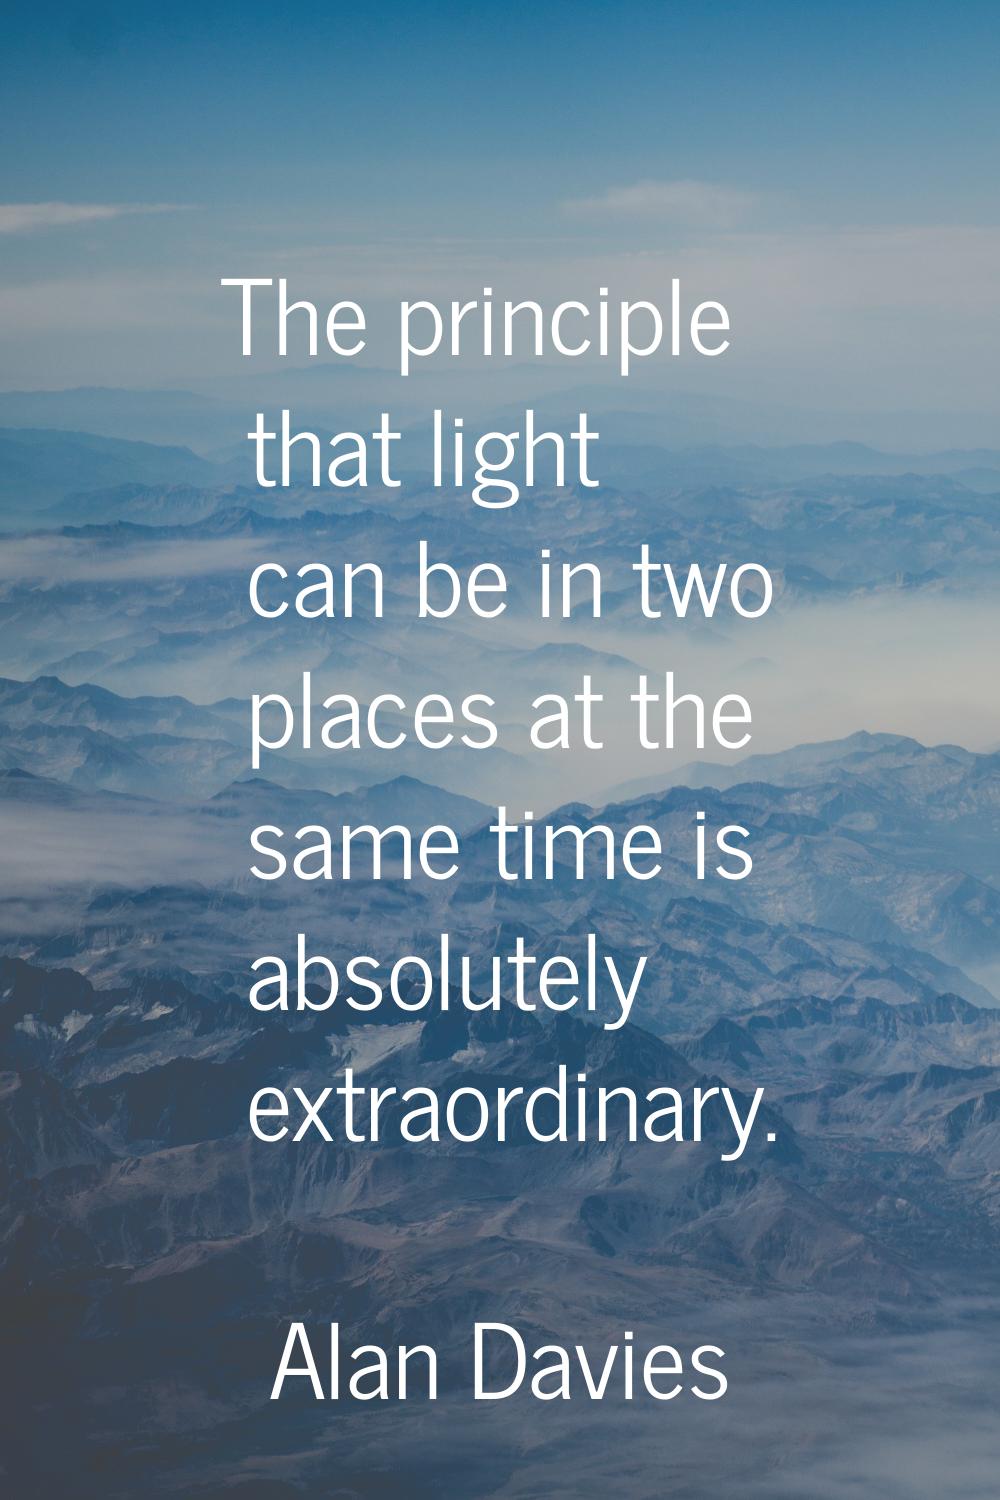 The principle that light can be in two places at the same time is absolutely extraordinary.